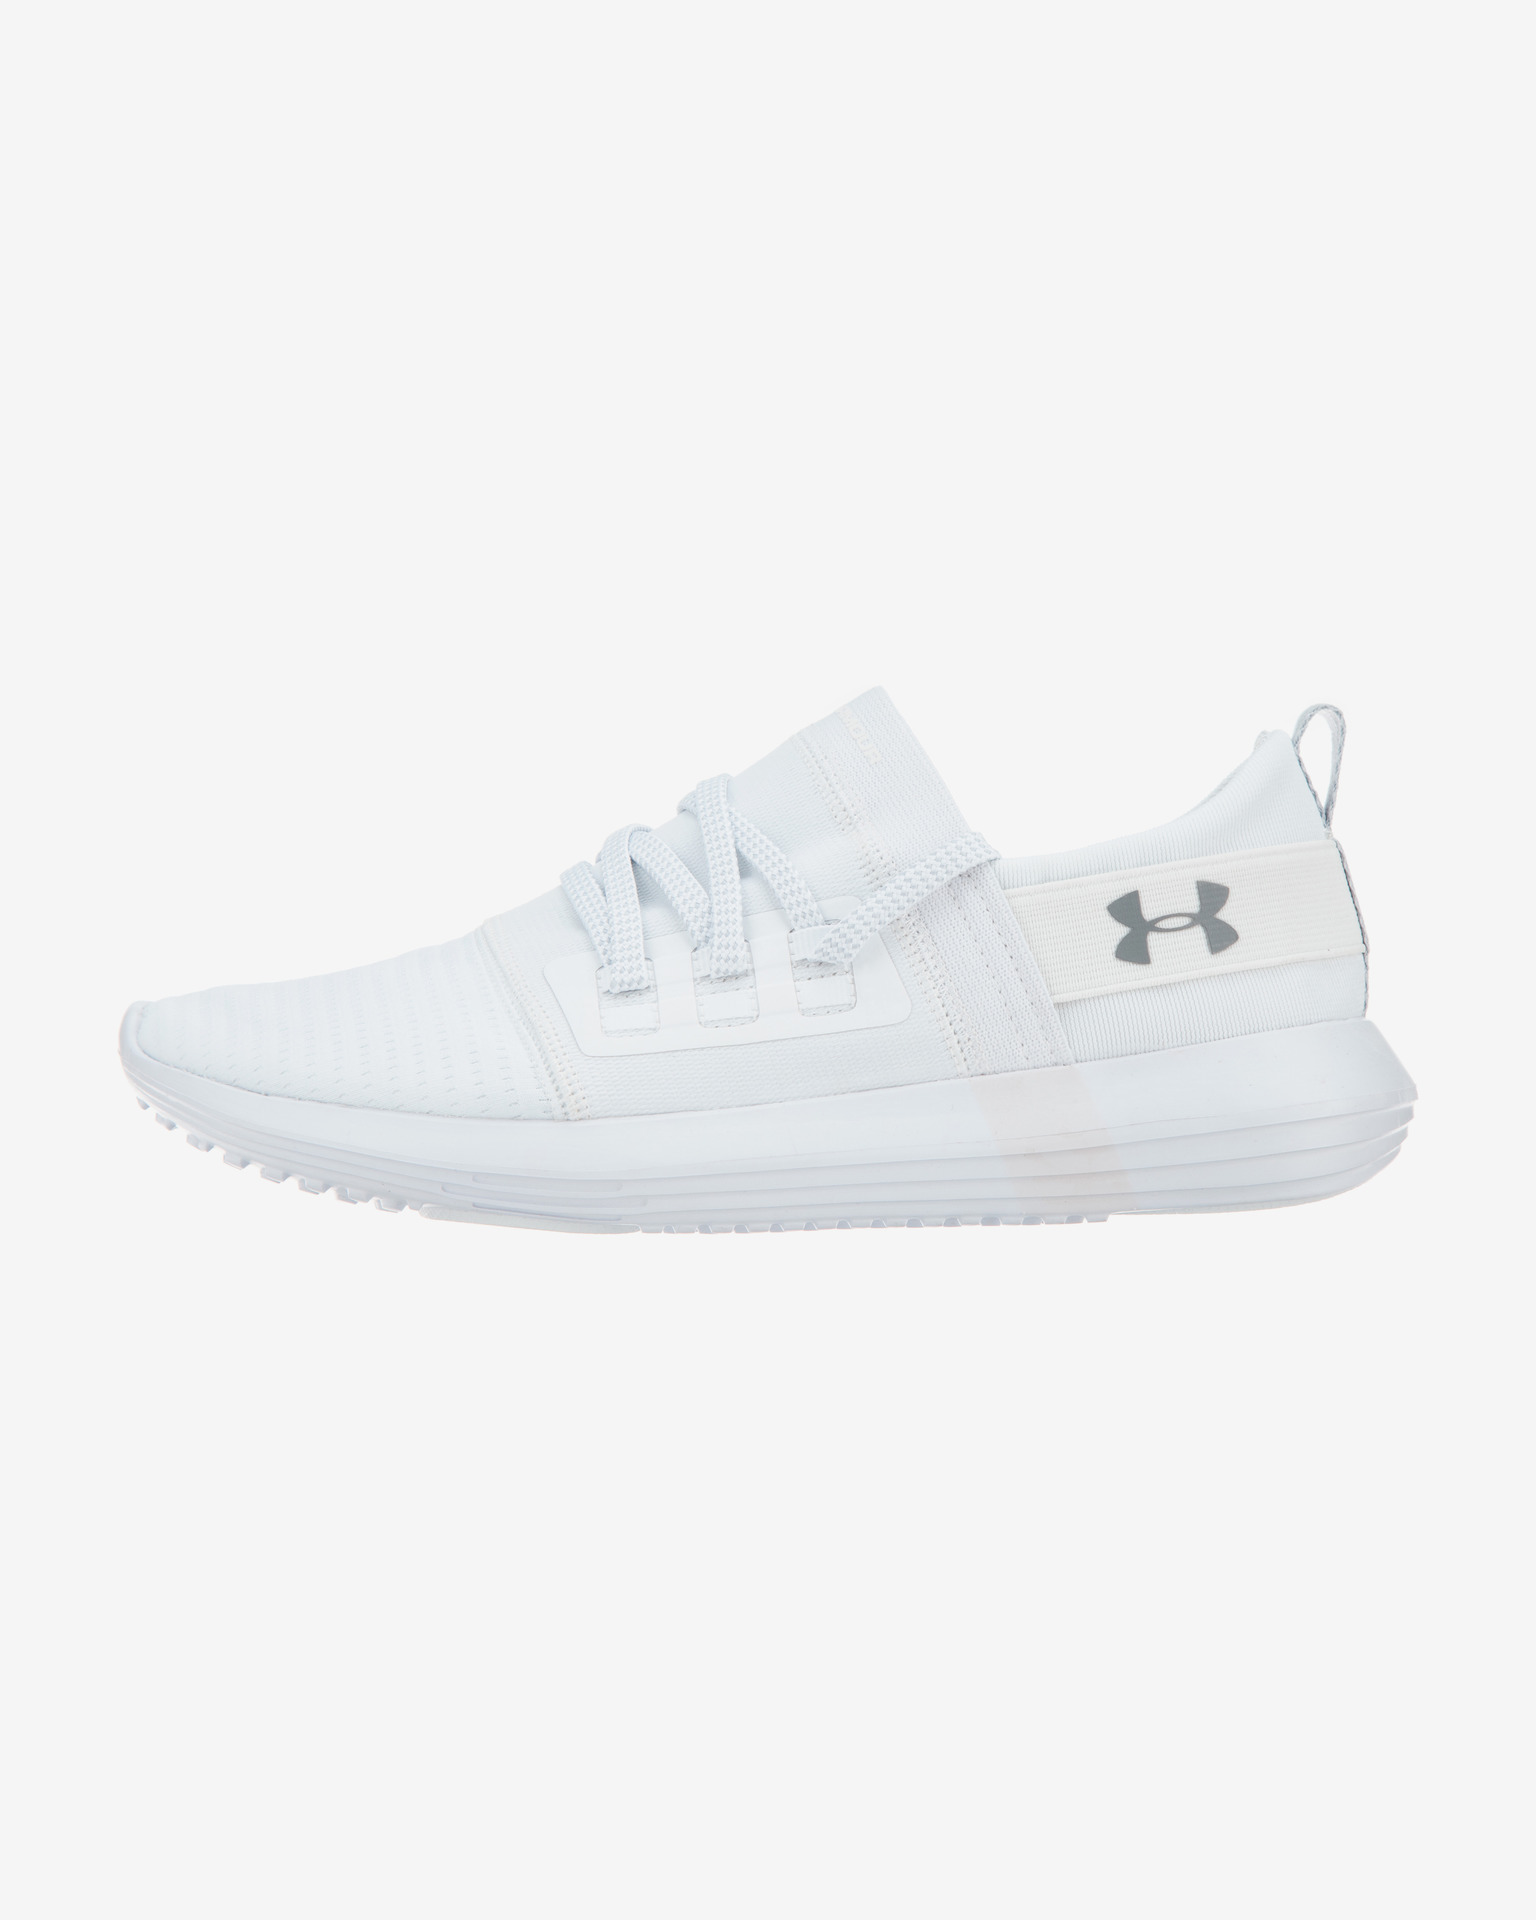 under armour vibe shoes